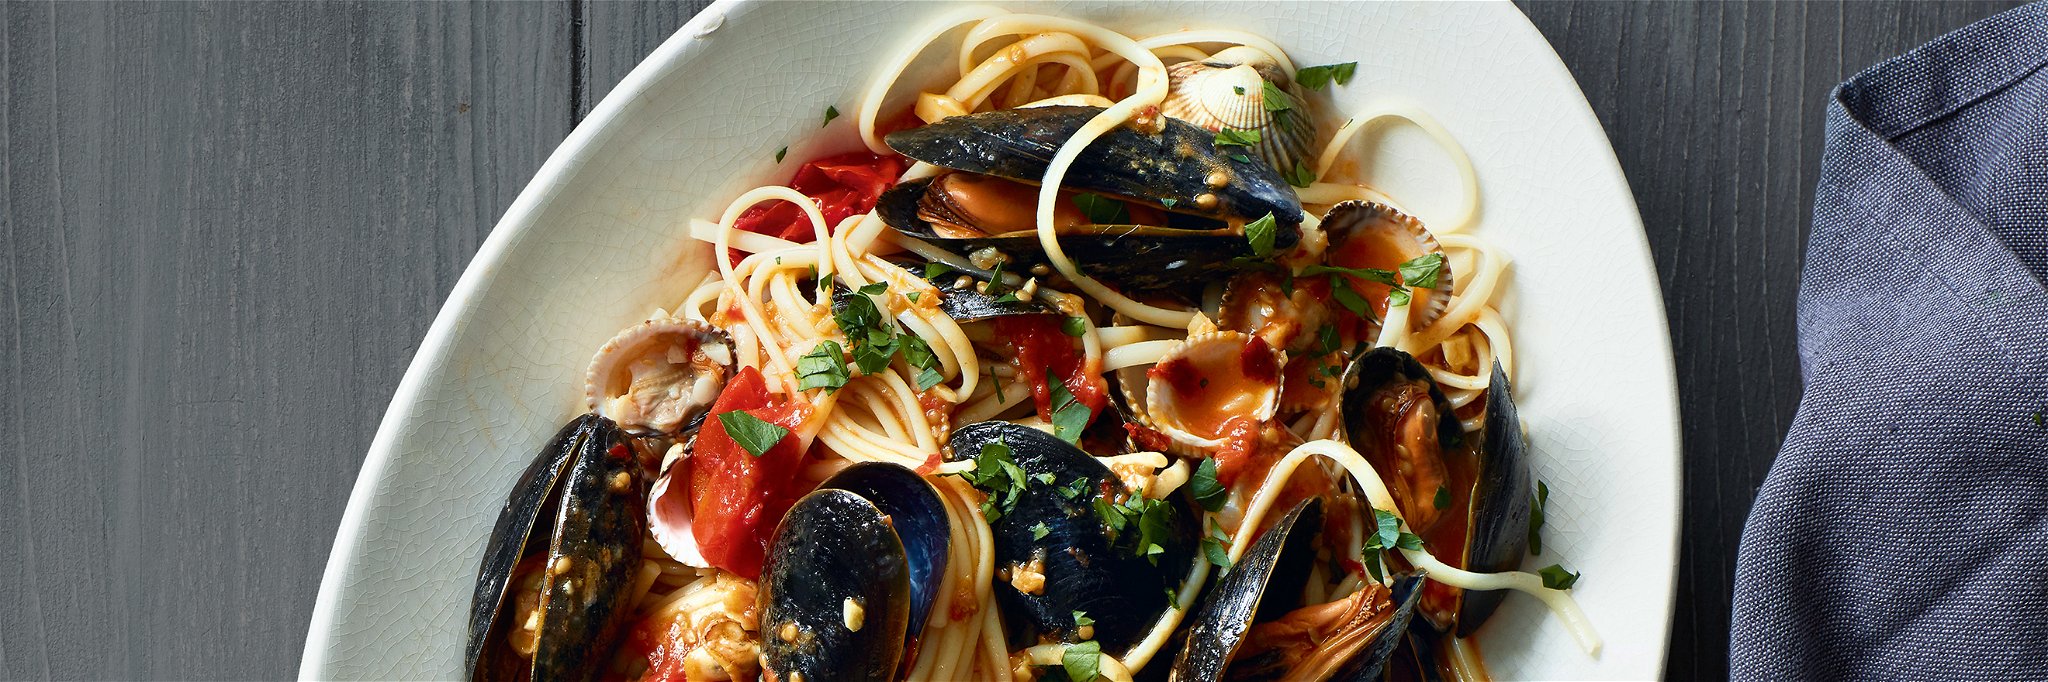 Pasta with Clams and Mussels